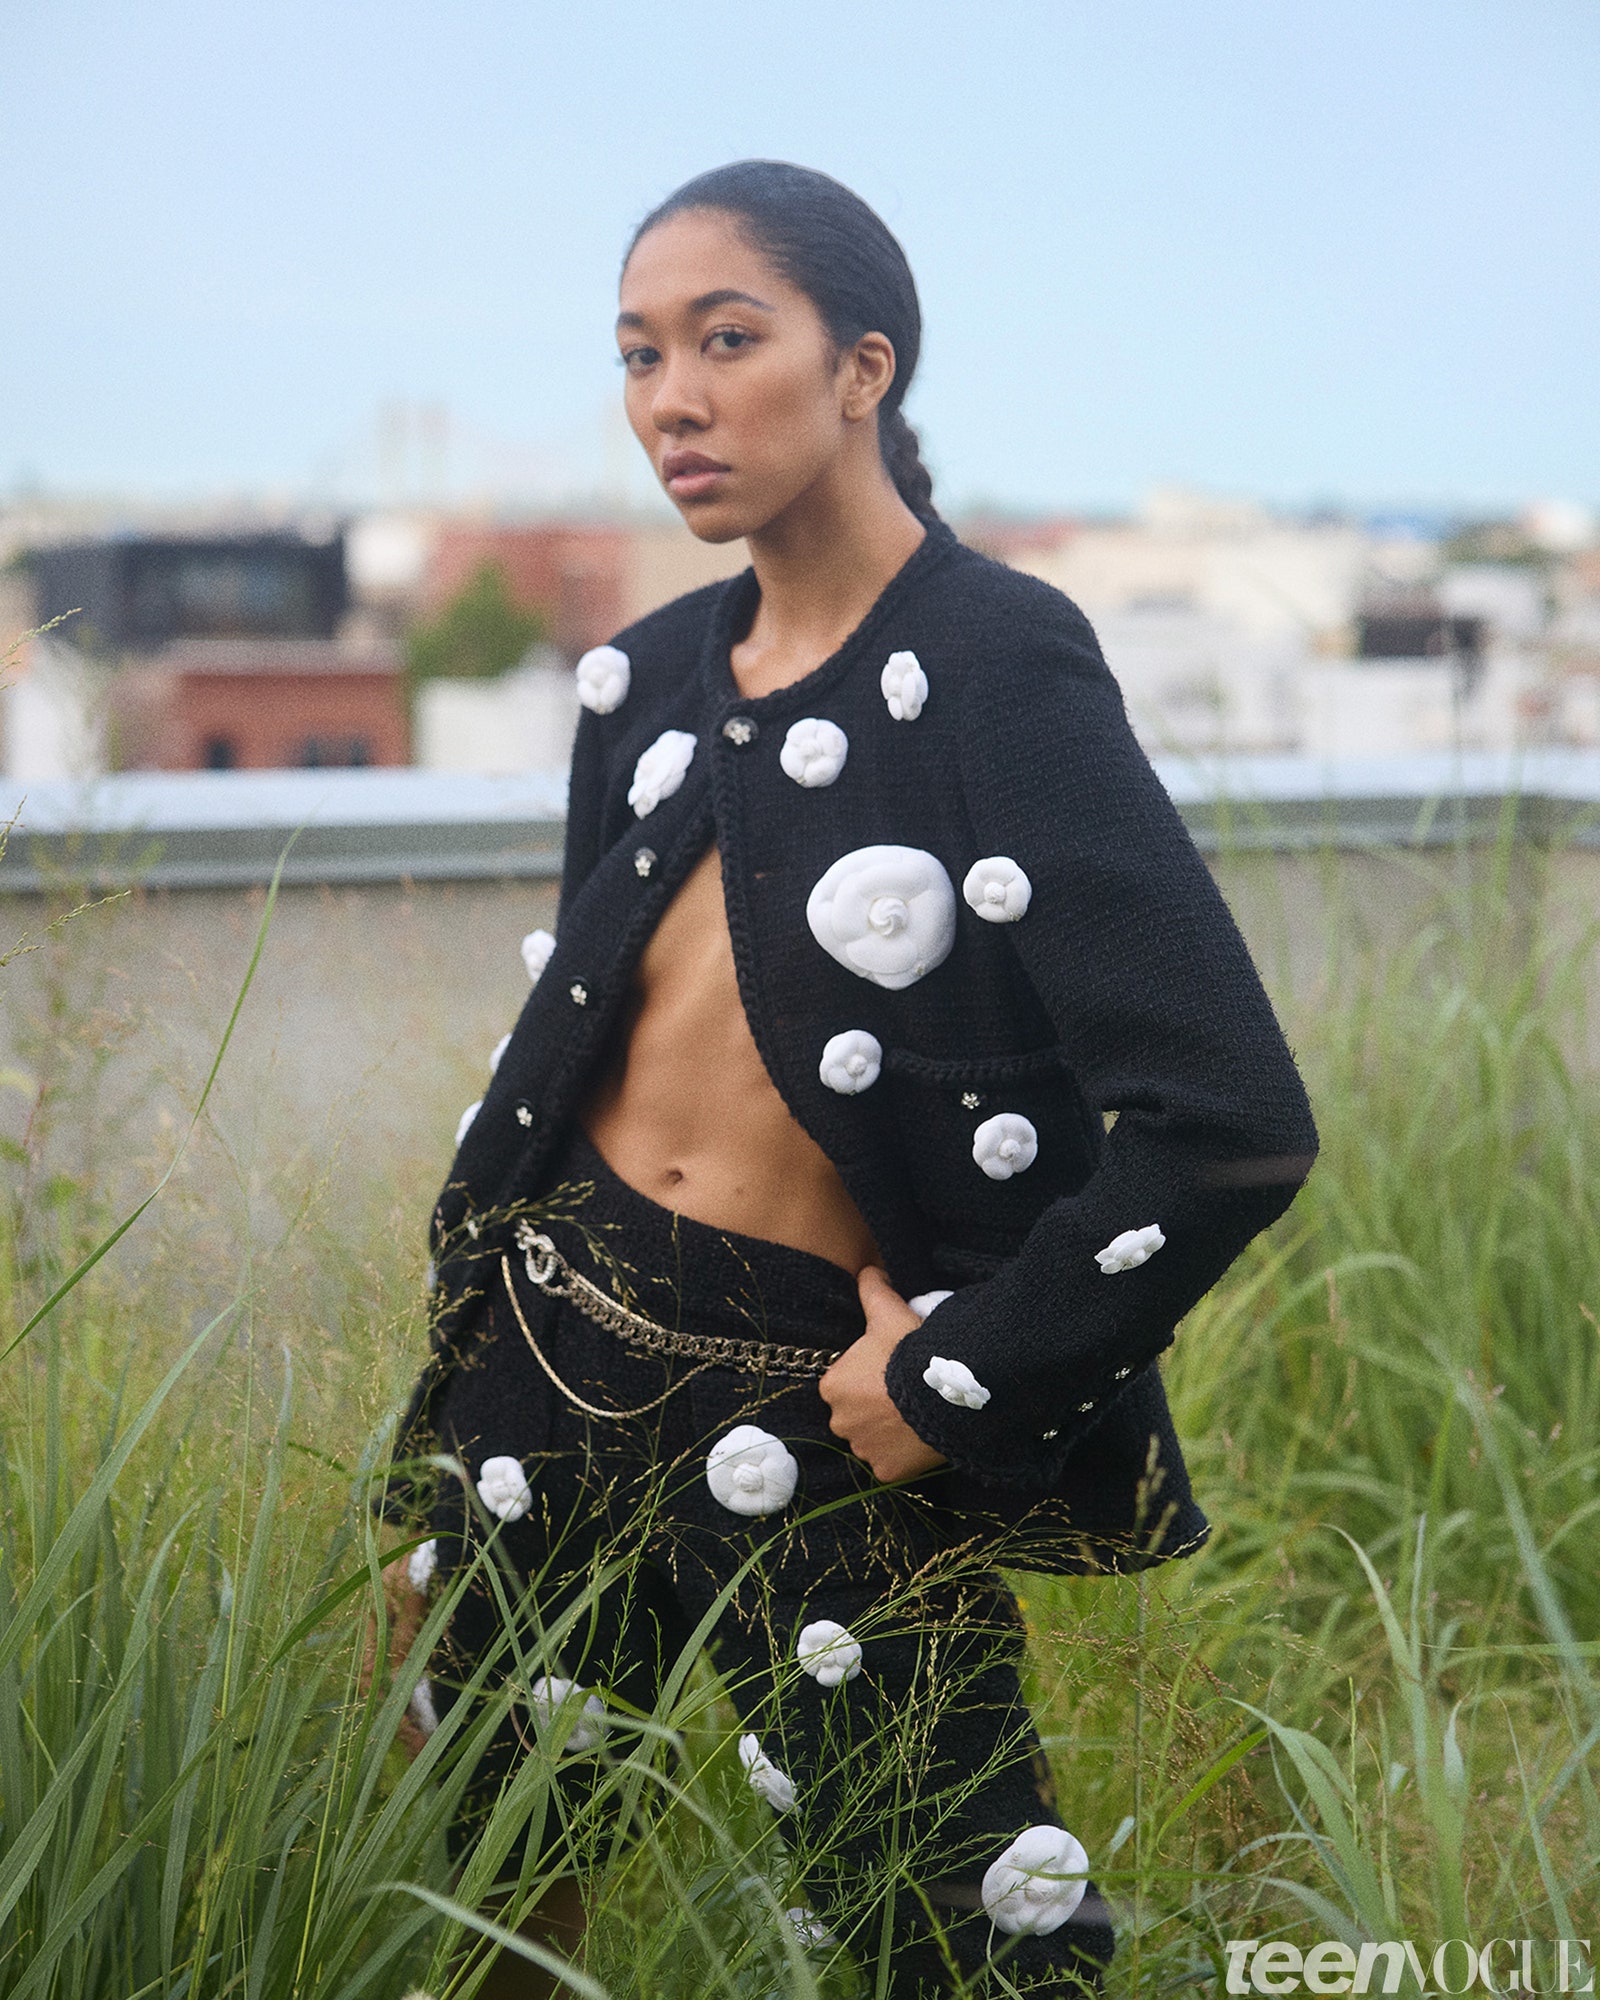 Aoki Lee Simmons wearing polka dots standing in grass